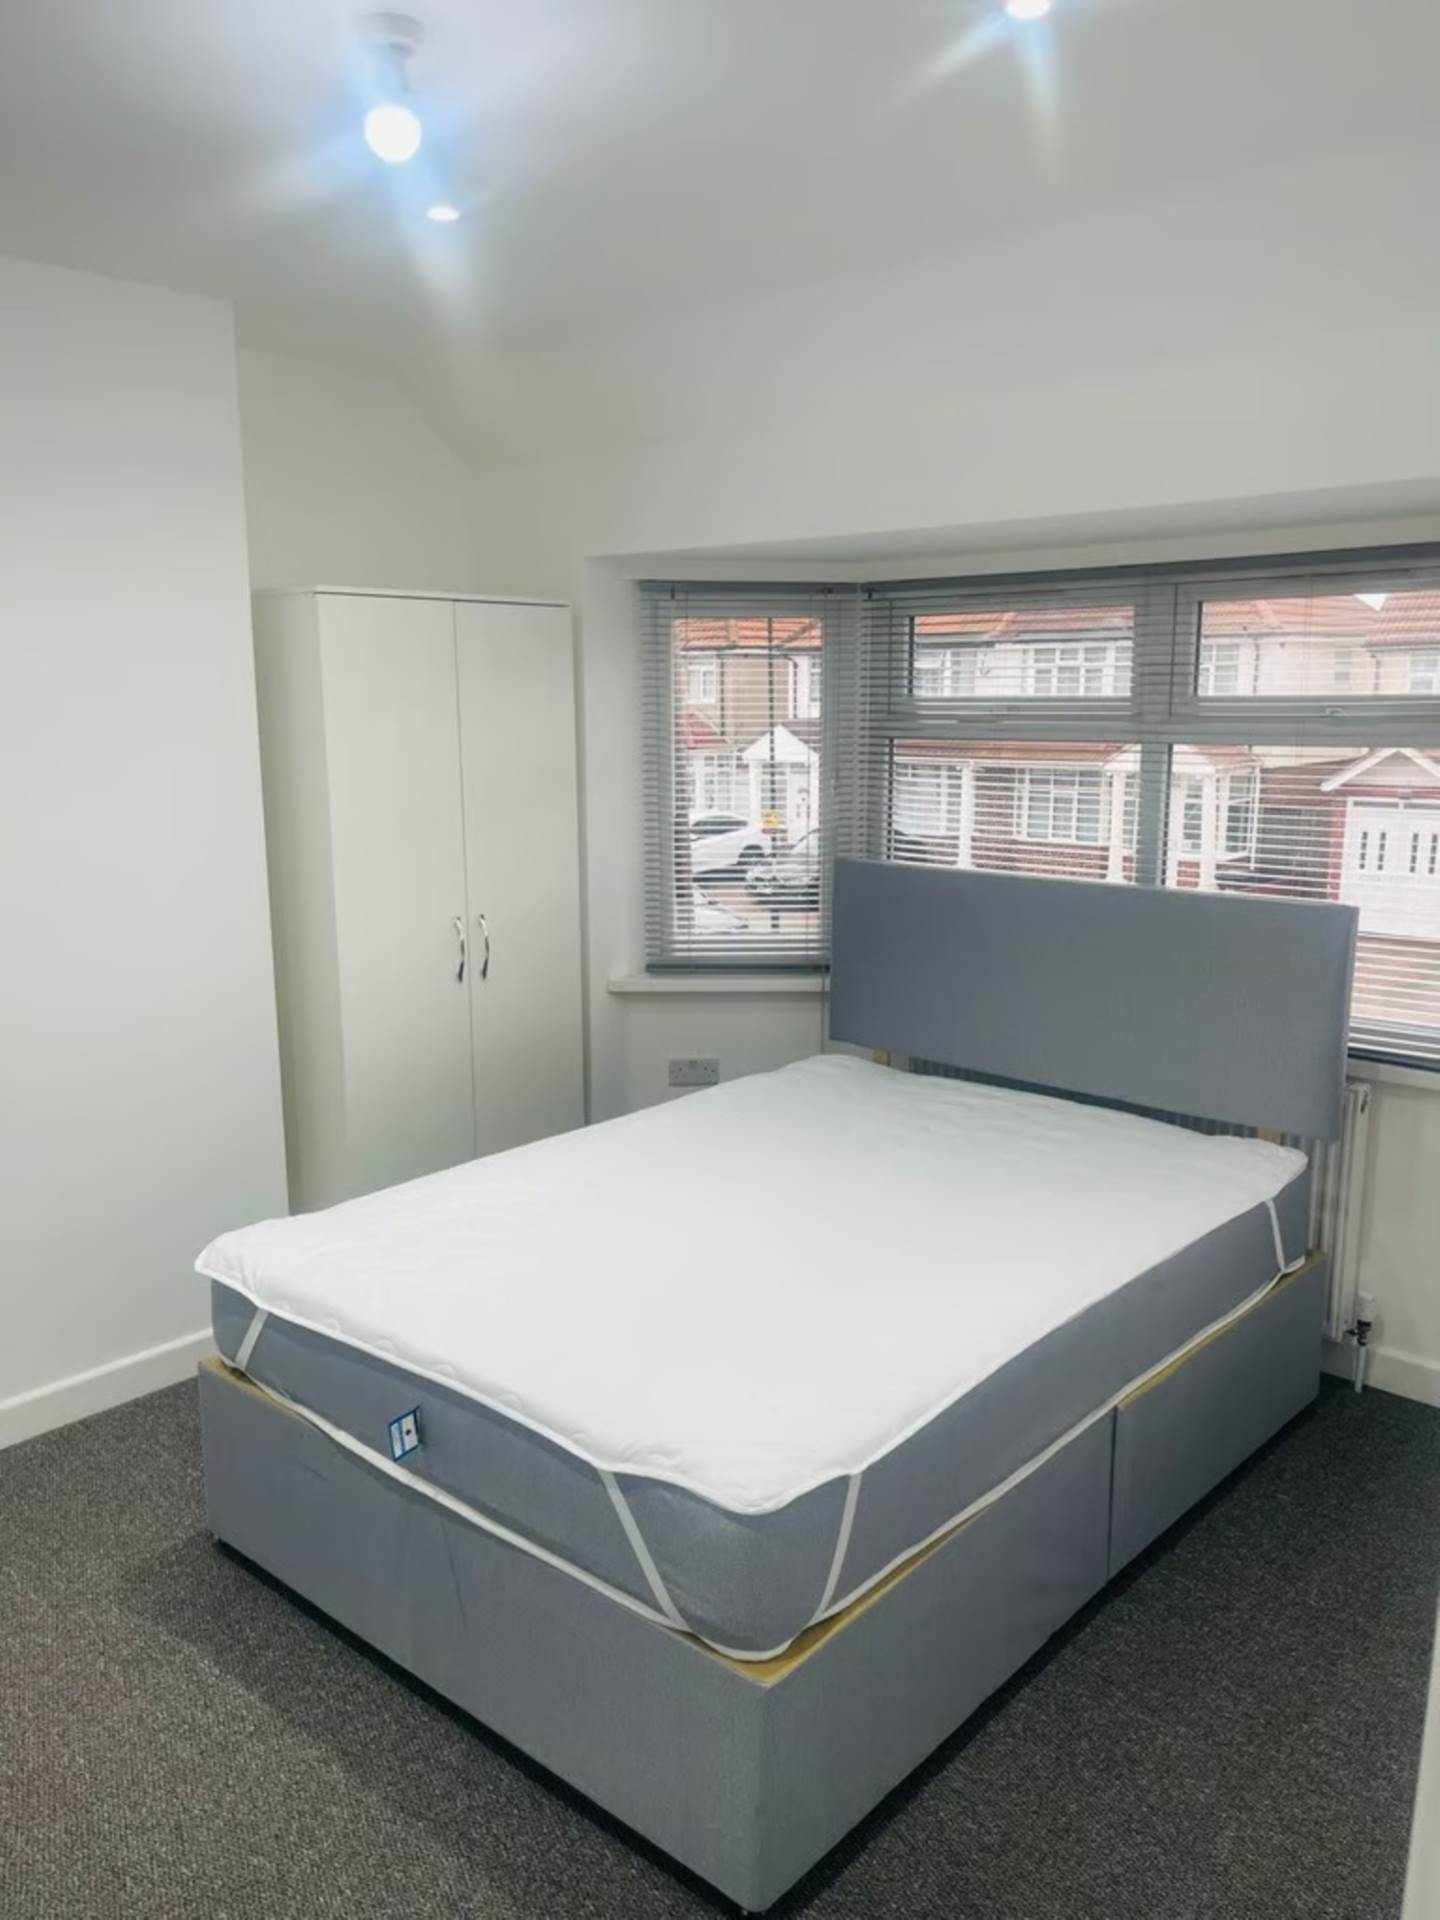 3 bed Room for rent in Hounslow. From Sutherland Estates